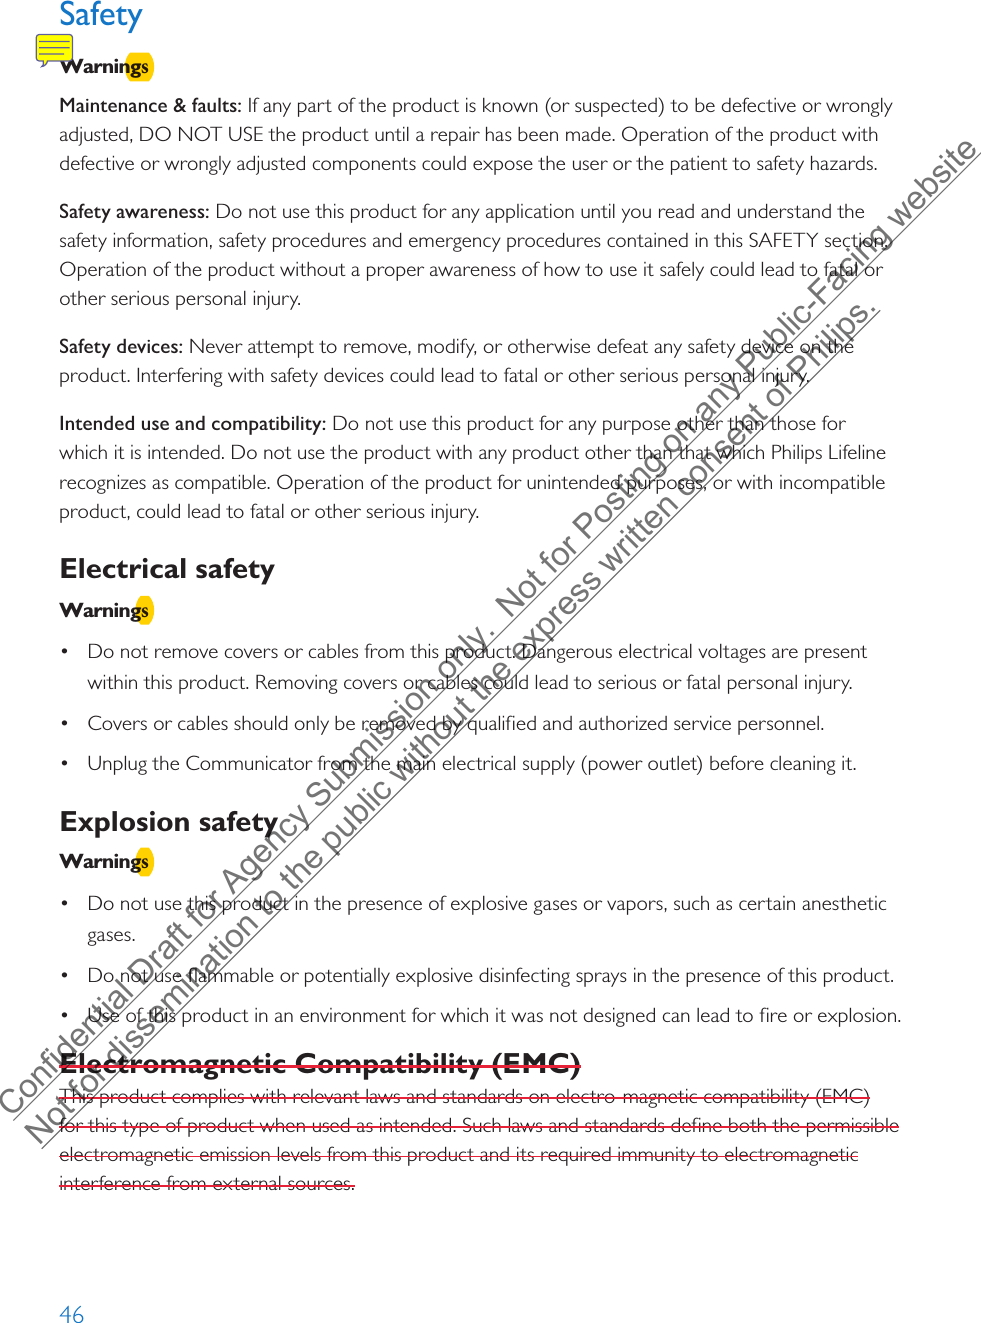 46SafetyWarningsMaintenance &amp; faults: If any part of the product is known (or suspected) to be defective or wrongly adjusted, DO NOT USE the product until a repair has been made. Operation of the product with defective or wrongly adjusted components could expose the user or the patient to safety hazards. Safety awareness: Do not use this product for any application until you read and understand the safety information, safety procedures and emergency procedures contained in this SAFETY section. Operation of the product without a proper awareness of how to use it safely could lead to fatal or other serious personal injury. Safety devices: Never attempt to remove, modify, or otherwise defeat any safety device on the product. Interfering with safety devices could lead to fatal or other serious personal injury.Intended use and compatibility: Do not use this product for any purpose other than those for which it is intended. Do not use the product with any product other than that which Philips Lifeline recognizes as compatible. Operation of the product for unintended purposes, or with incompatible product, could lead to fatal or other serious injury. Electrical safety Warnings•Do not remove covers or cables from this product. Dangerous electrical voltages are presentwithin this product. Removing covers or cables could lead to serious or fatal personal injury.•Covers or cables should only be removed by qualified and authorized service personnel.•Unplug the Communicator from the main electrical supply (power outlet) before cleaning it.Explosion safety Warnings•Do not use this product in the presence of explosive gases or vapors, such as certain anestheticgases.•Do not use flammable or potentially explosive disinfecting sprays in the presence of this product.•Use of this product in an environment for which it was not designed can lead to fire or explosion.Electromagnetic Compatibility (EMC)This product complies with relevant laws and standards on electro-magnetic compatibility (EMC) for this type of product when used as intended. Such laws and standards define both the permissible electromagnetic emission levels from this product and its required immunity to electromagnetic interference from external sources. Confidential Draft for Agency Submission only.  Not for Posting on any Public-Facing website Not for dissemination to the public without the express written consent of Philips.  